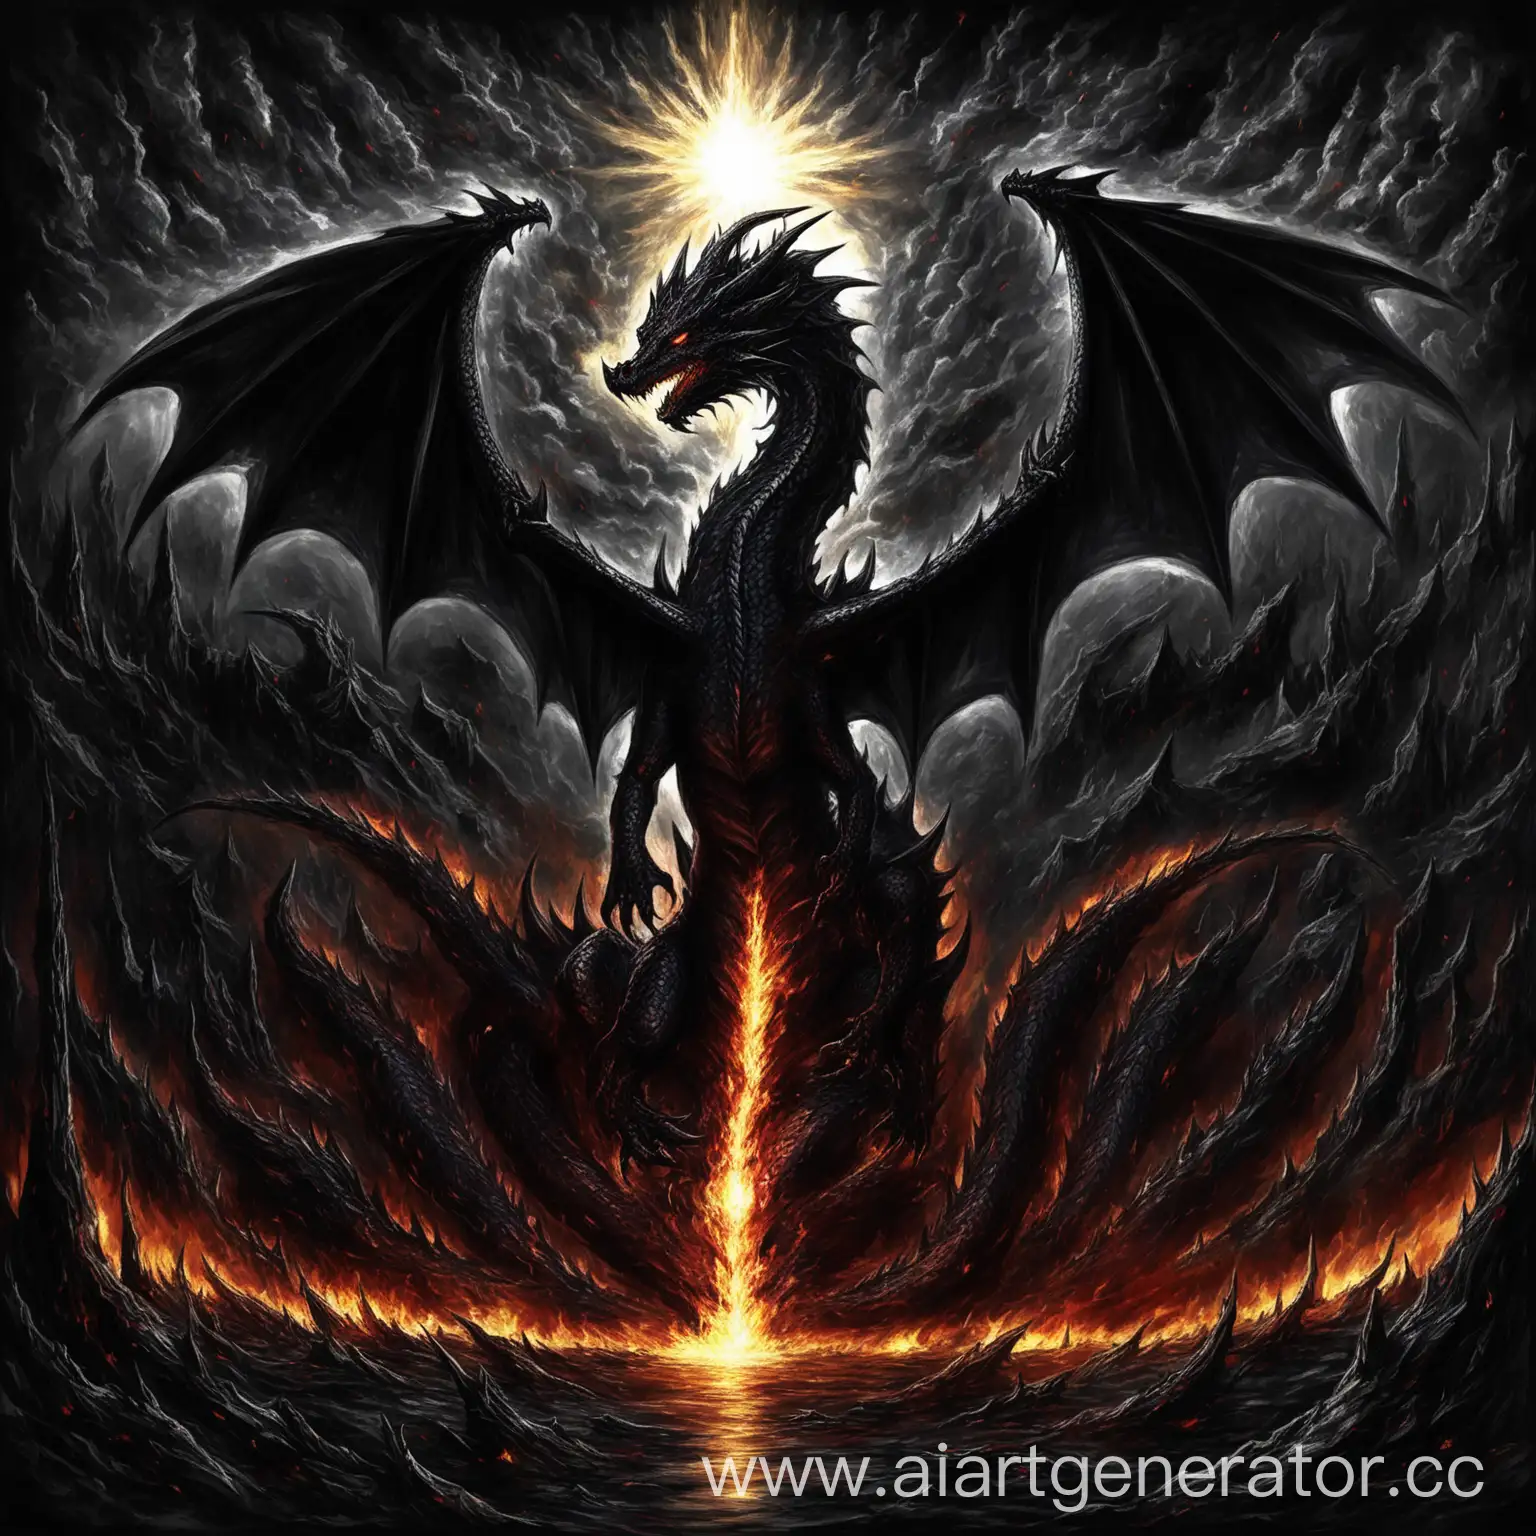 Reborn-Dark-Dragon-Sowing-Chaos-Ruler-of-Shadows-and-Stars